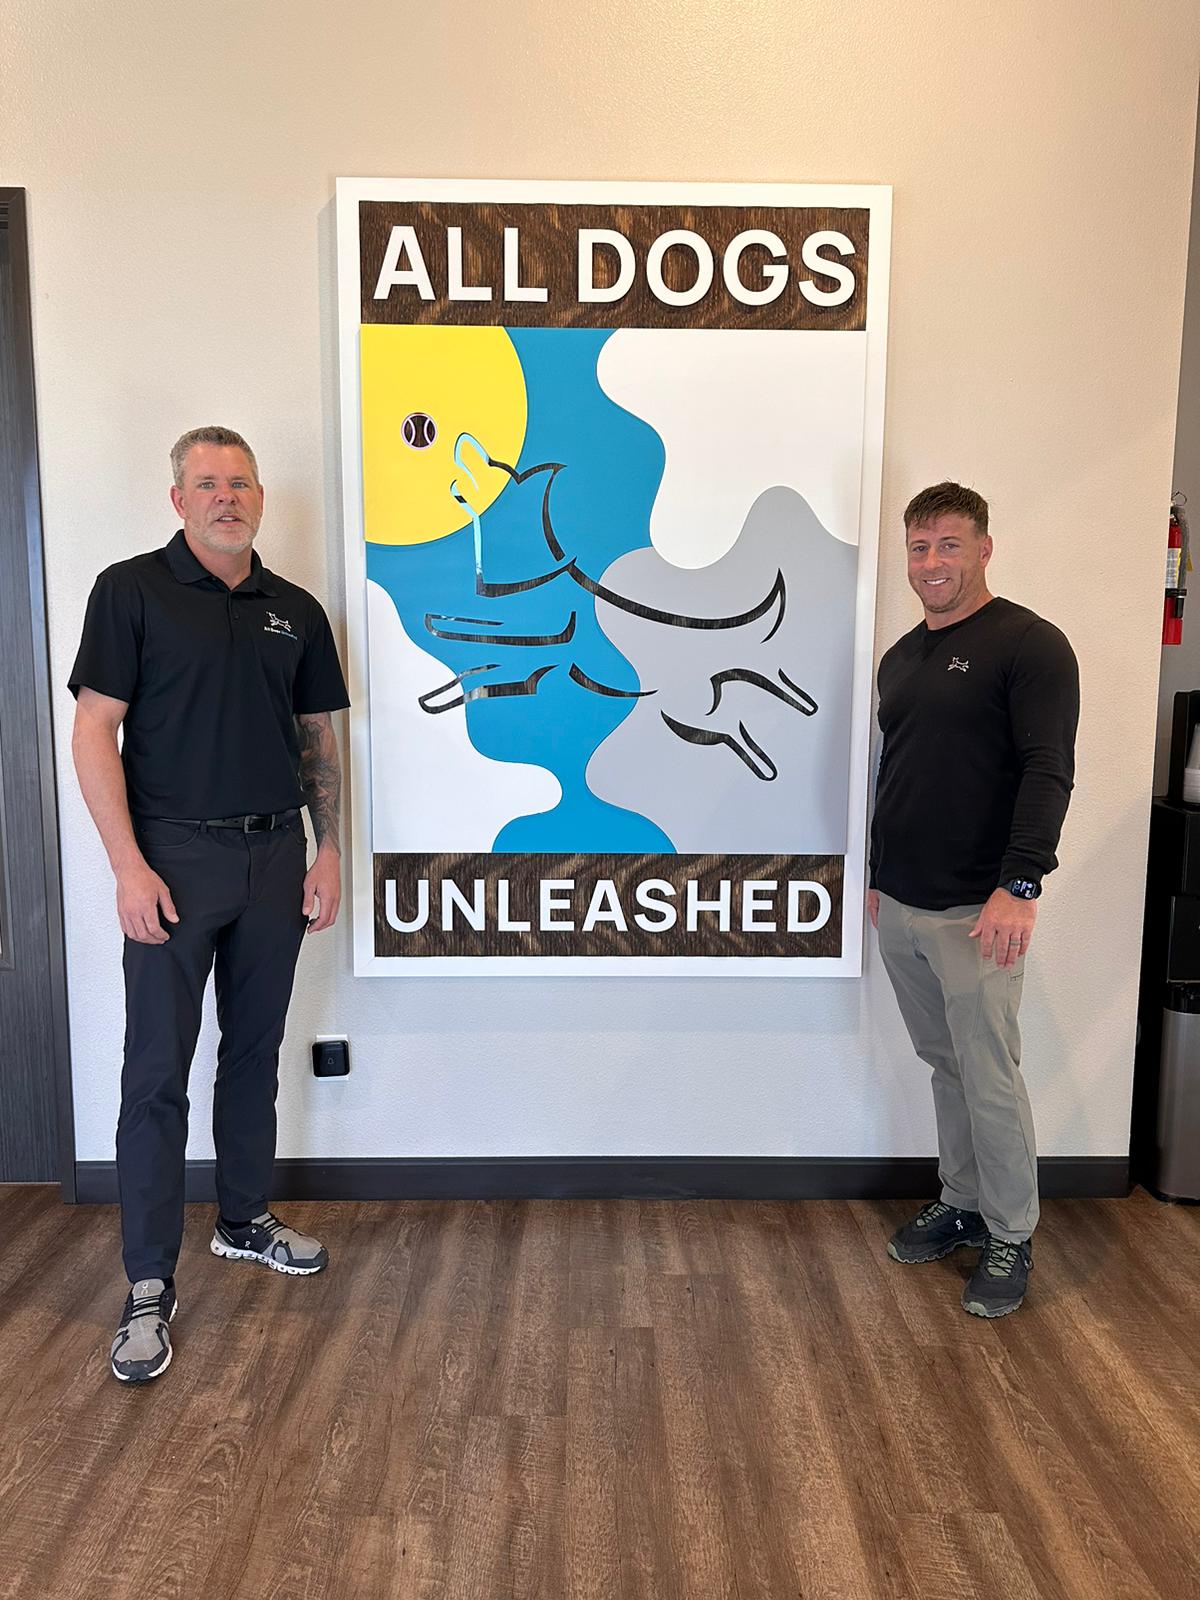 All Dogs Unleashed, Monday, February 6, 2023, Press release picture